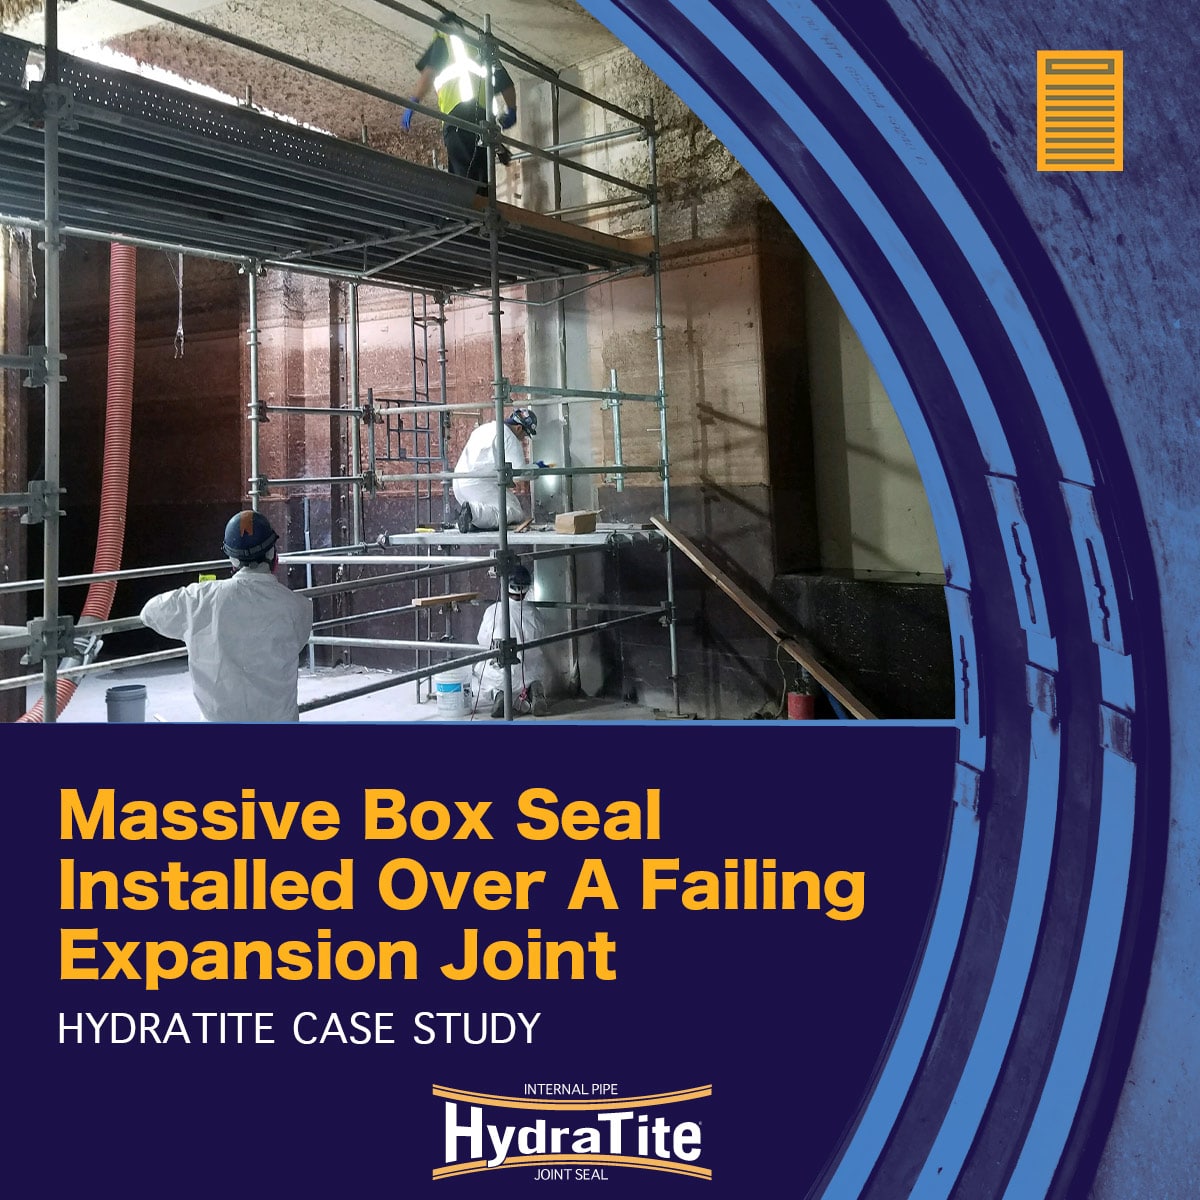 large expansion joint being repaired by a crew using scaffolding, 'Massive Box Seal Installed Over A Failing Expansion Joint'